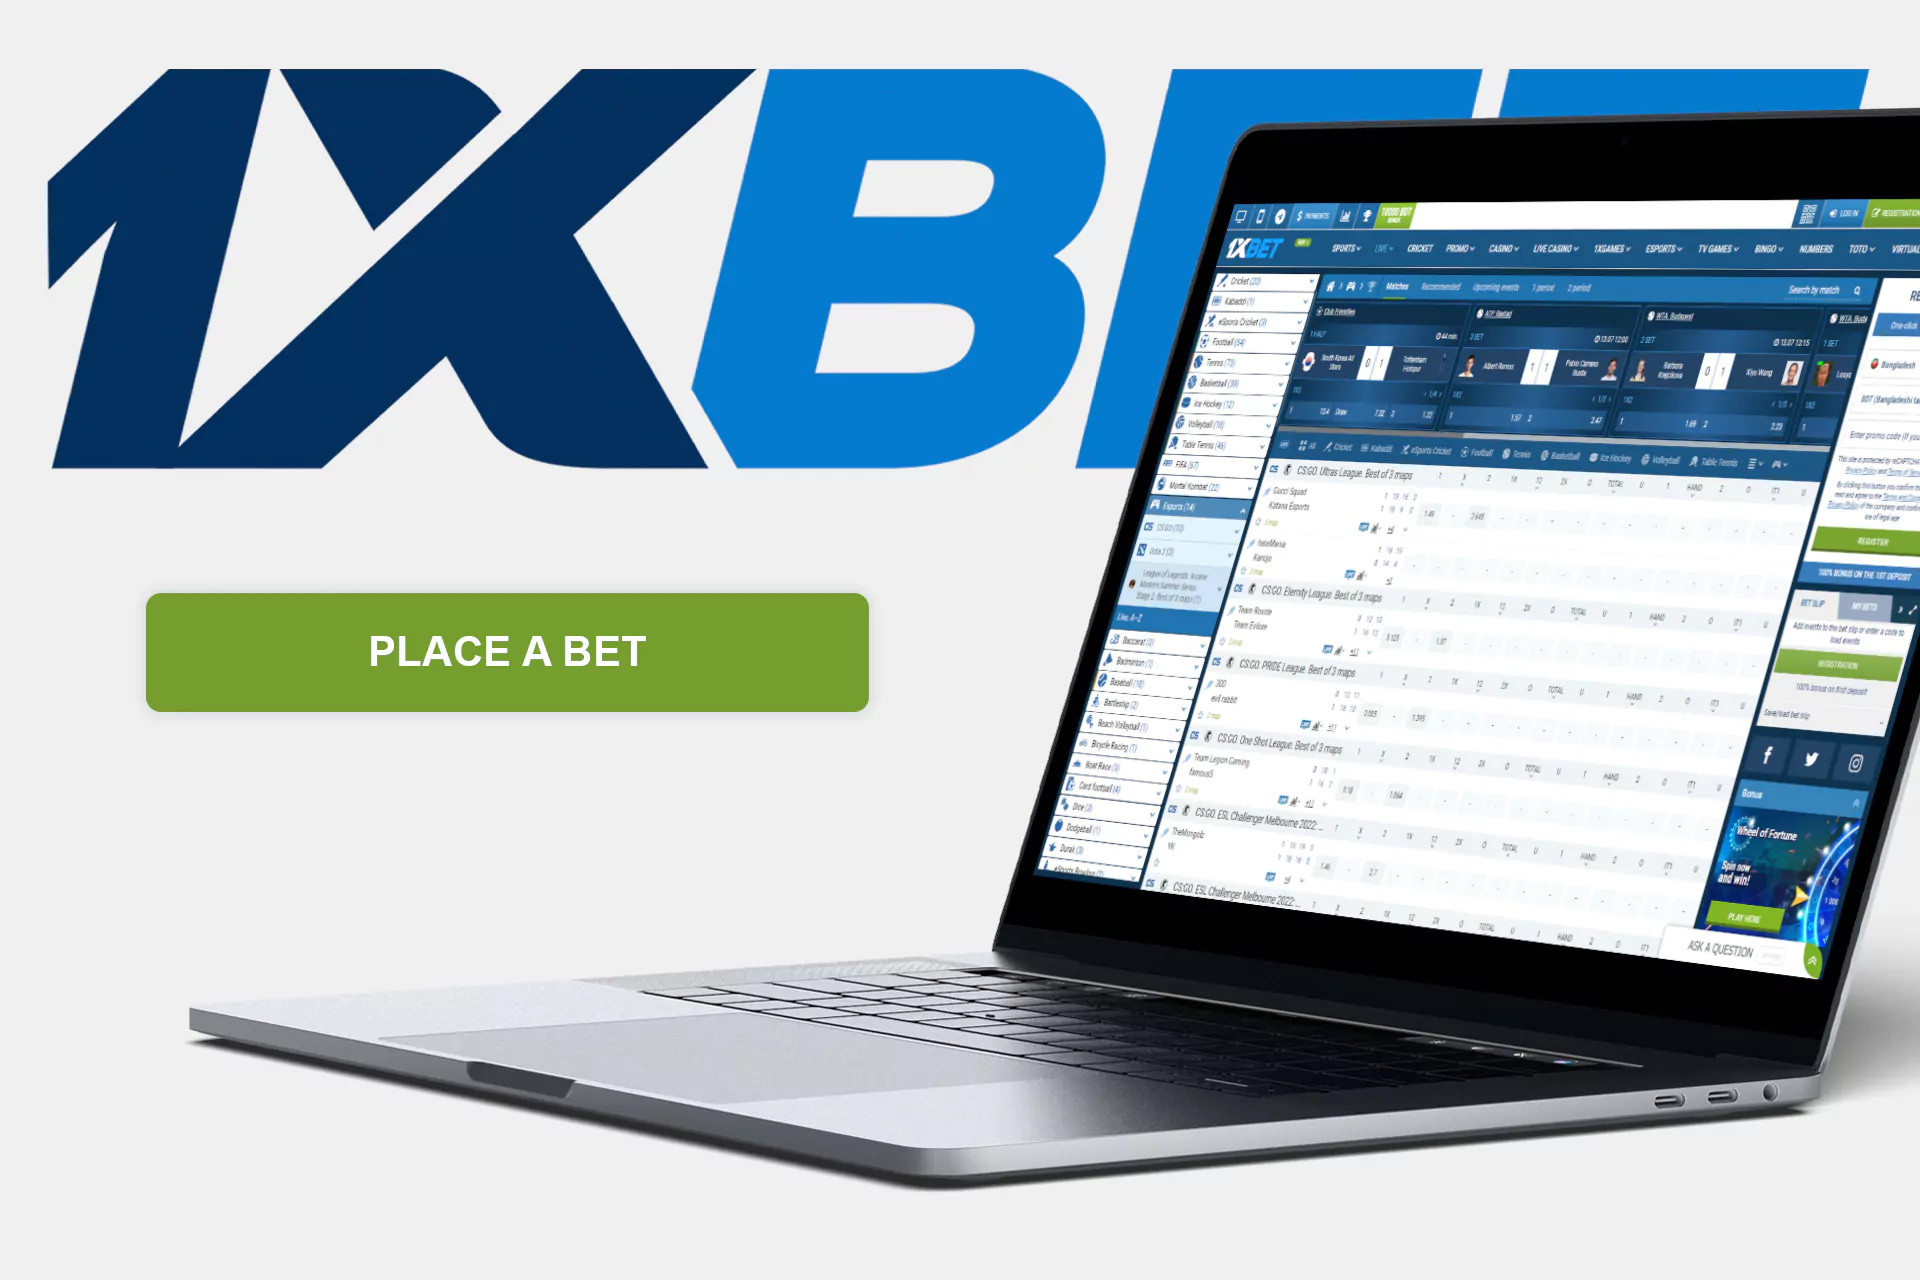 At 1xBet you can place bets on any esports events.